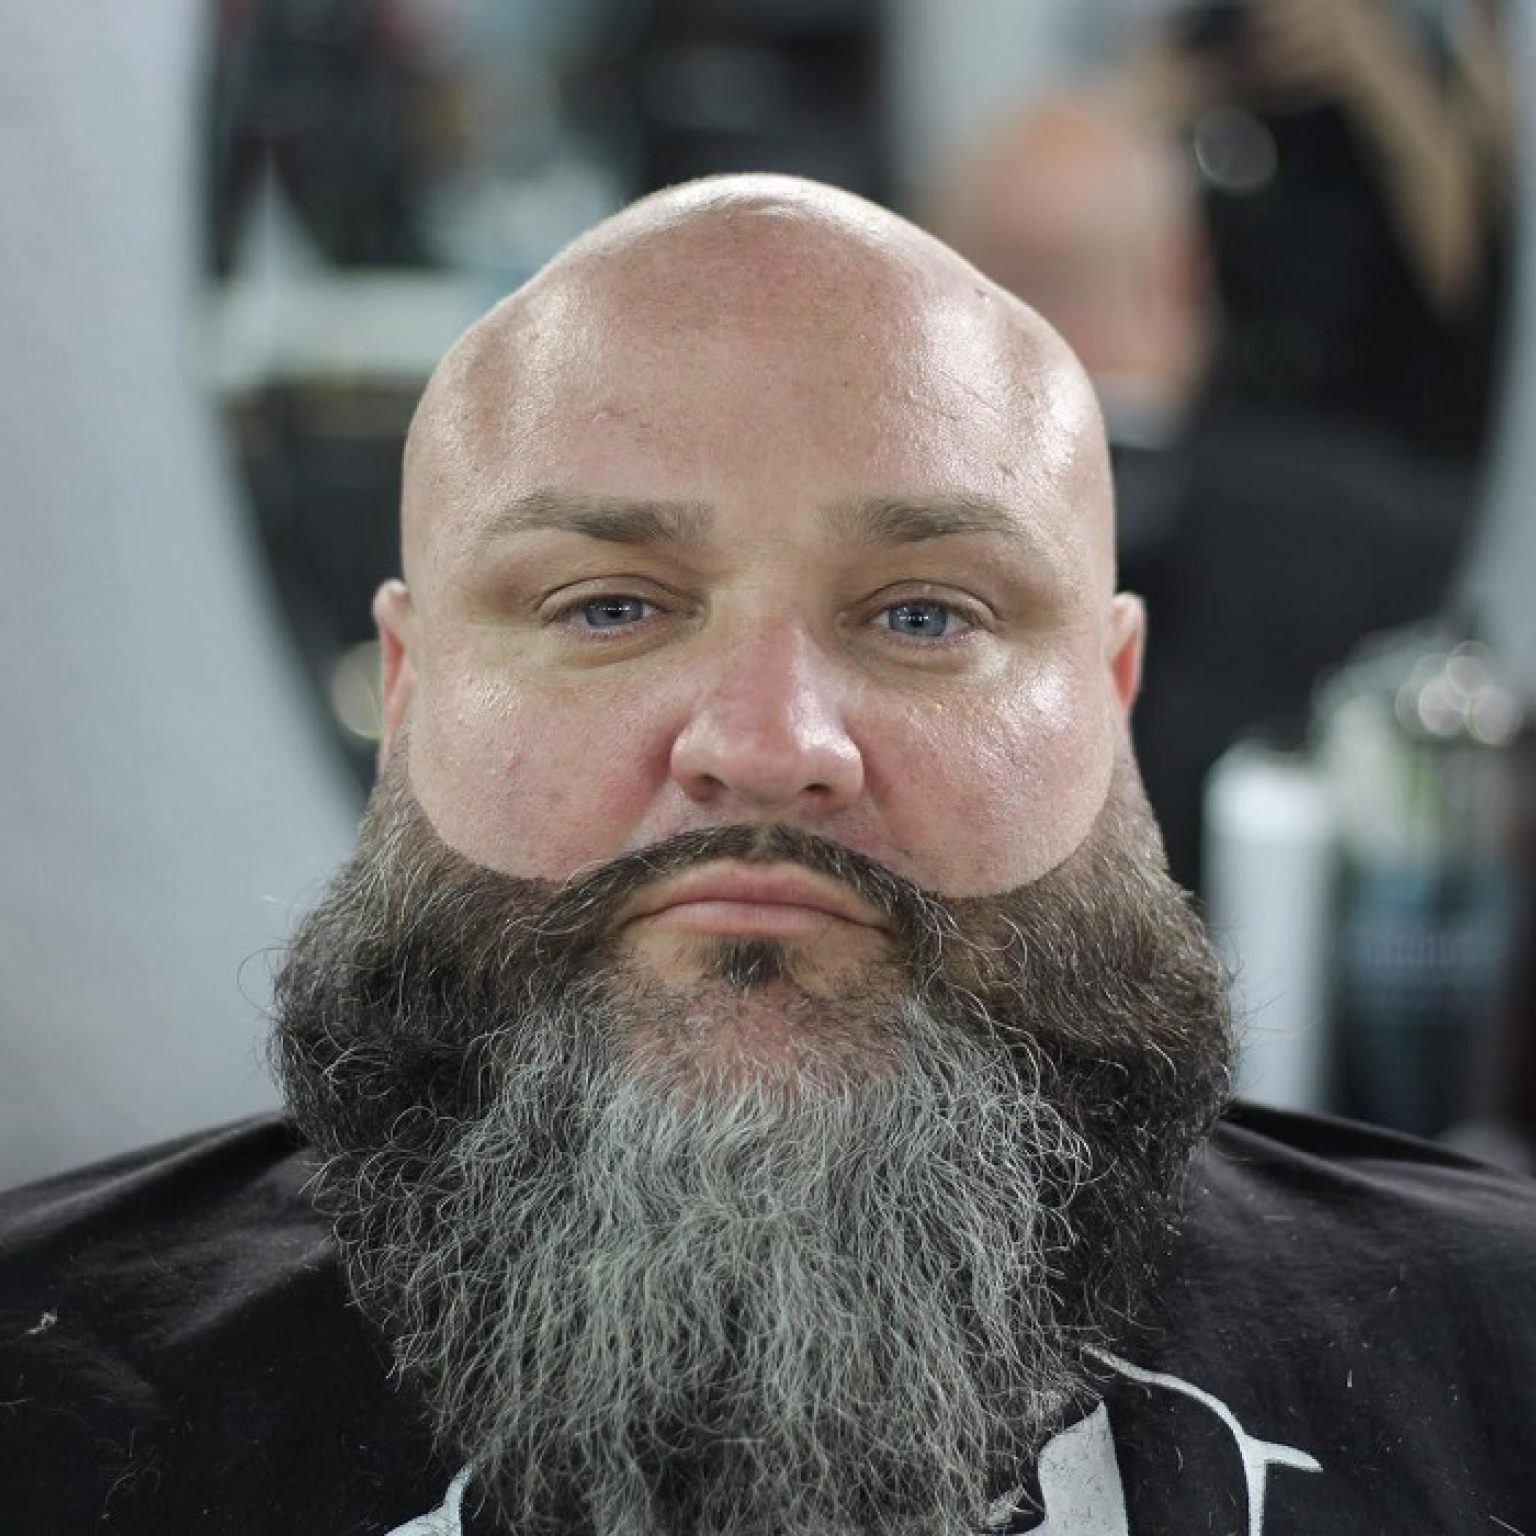 45 Best Haircuts for "Fat" Faces-Find Your Perfect One[2021]